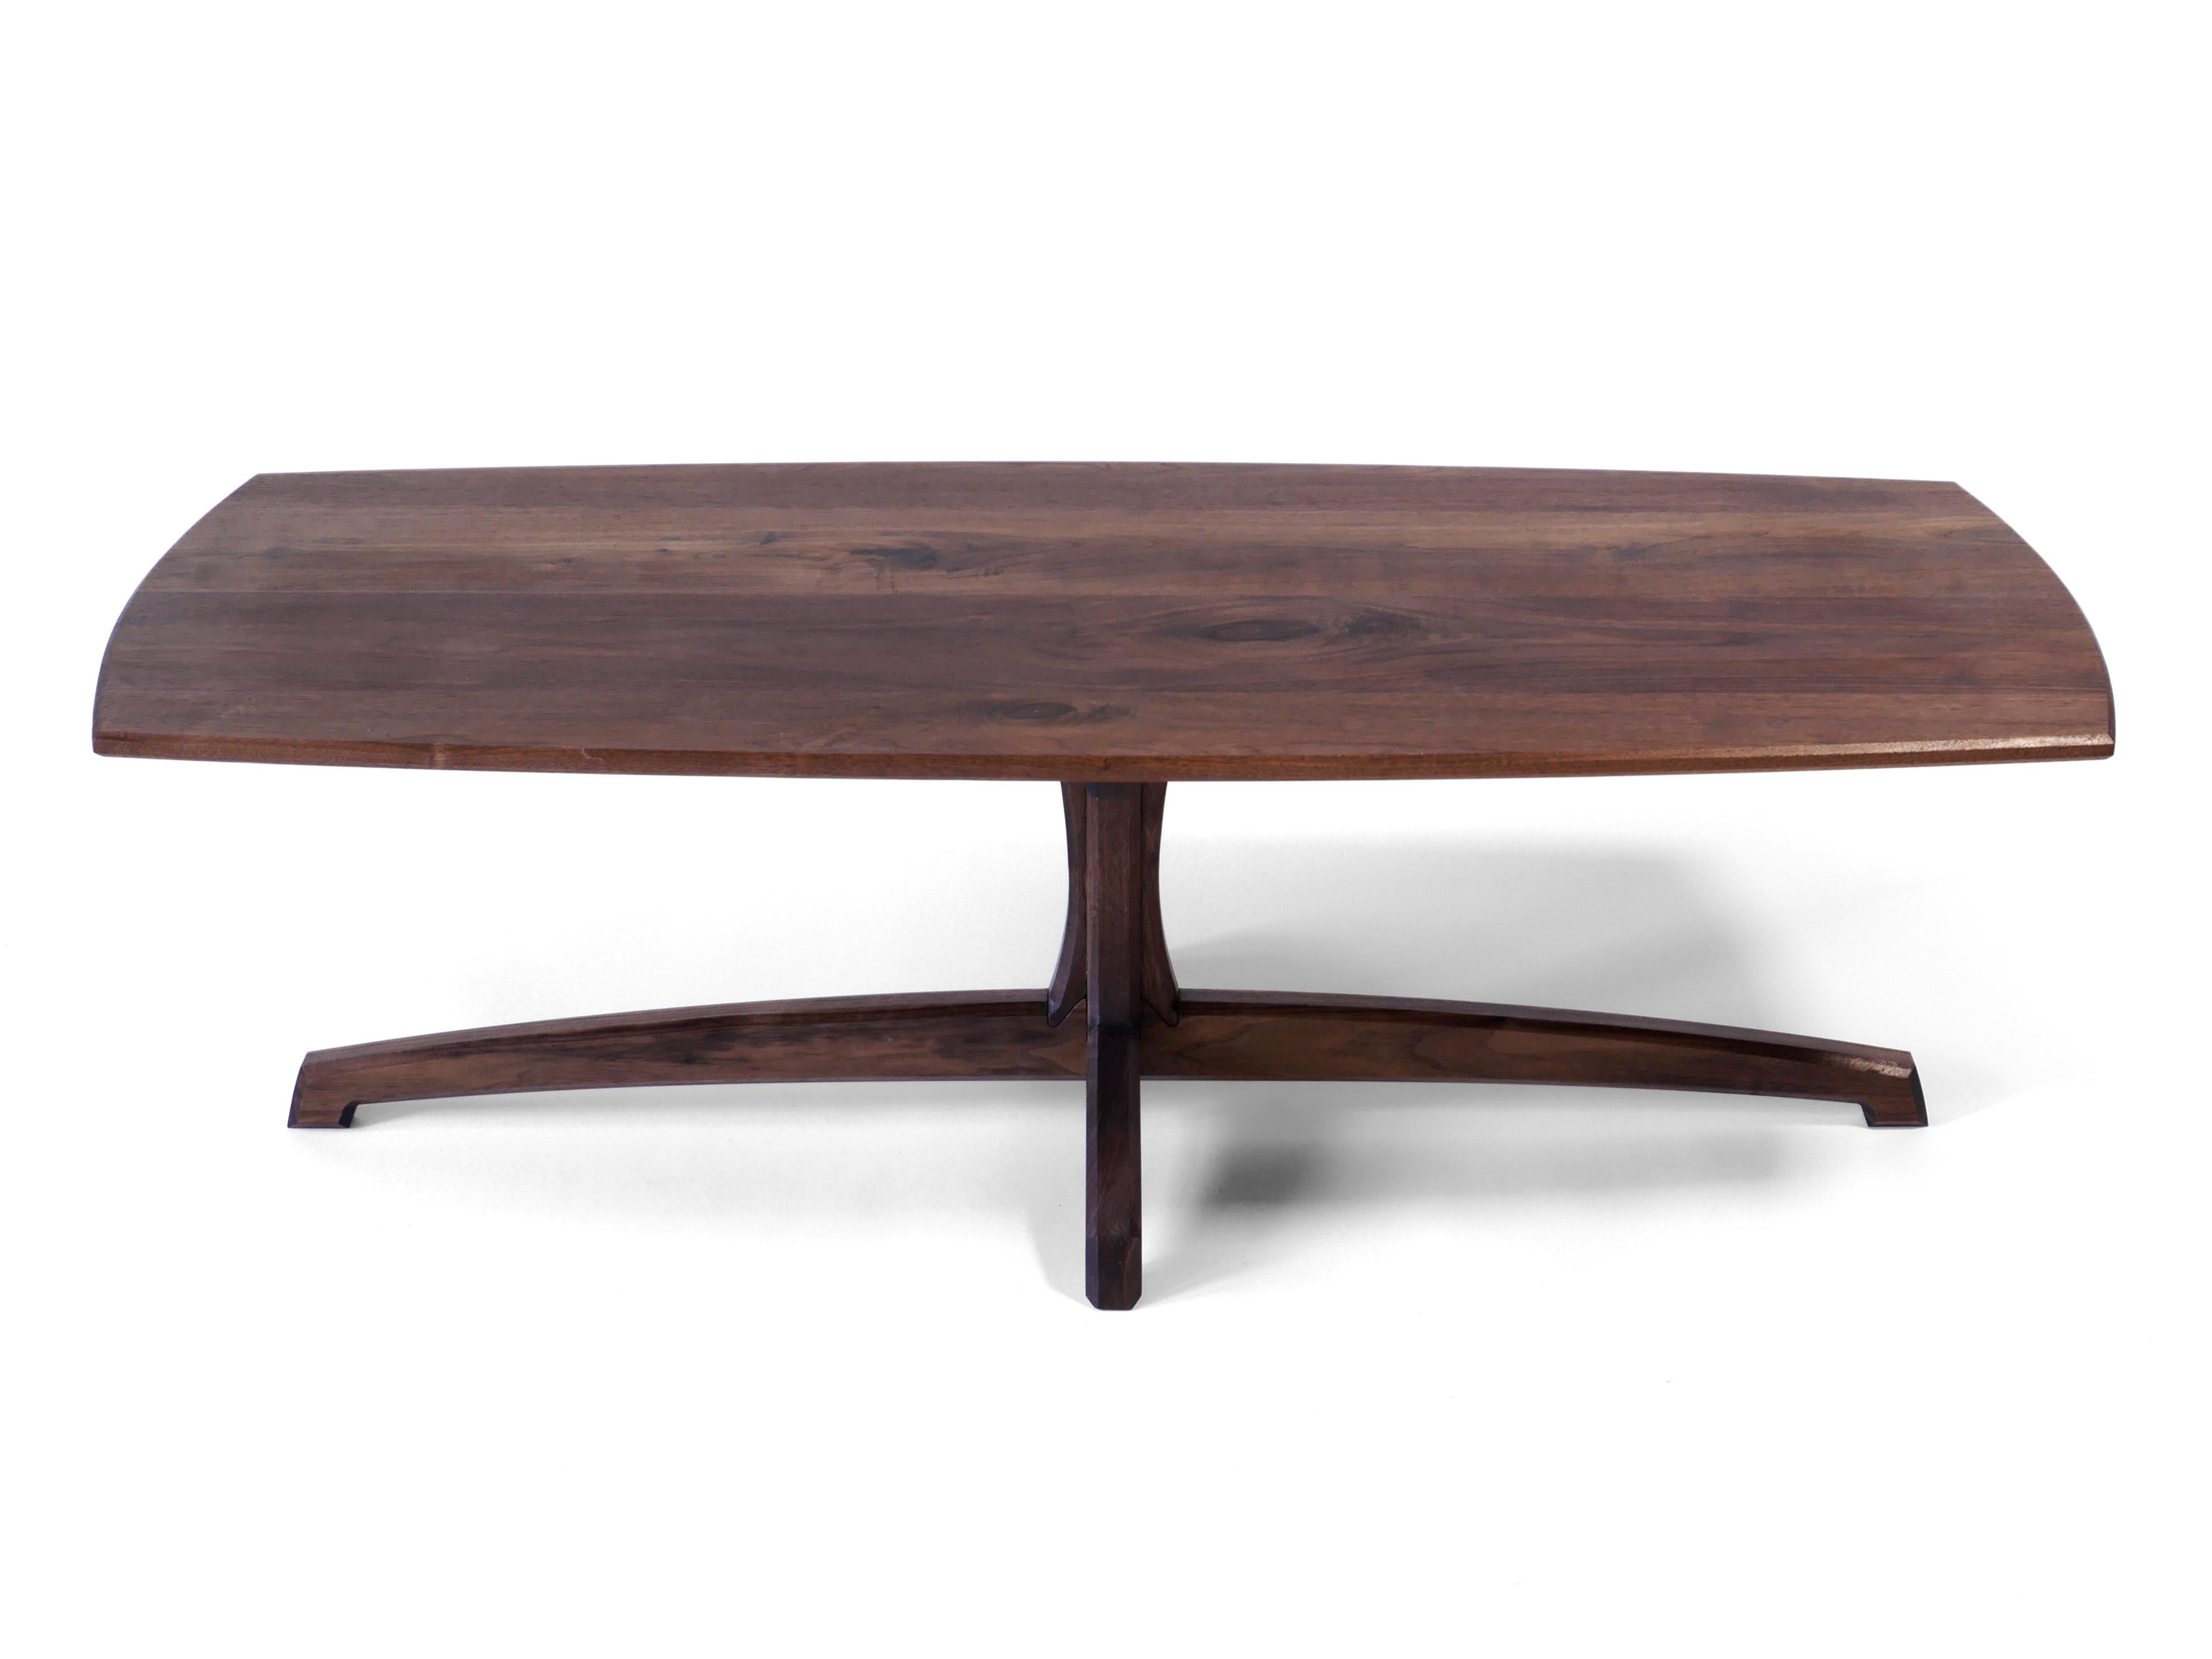 Walnut Plume Coffee Table, Contemporary Pedestal Living Room Table by Arid In New Condition For Sale In Albuquerque, NM